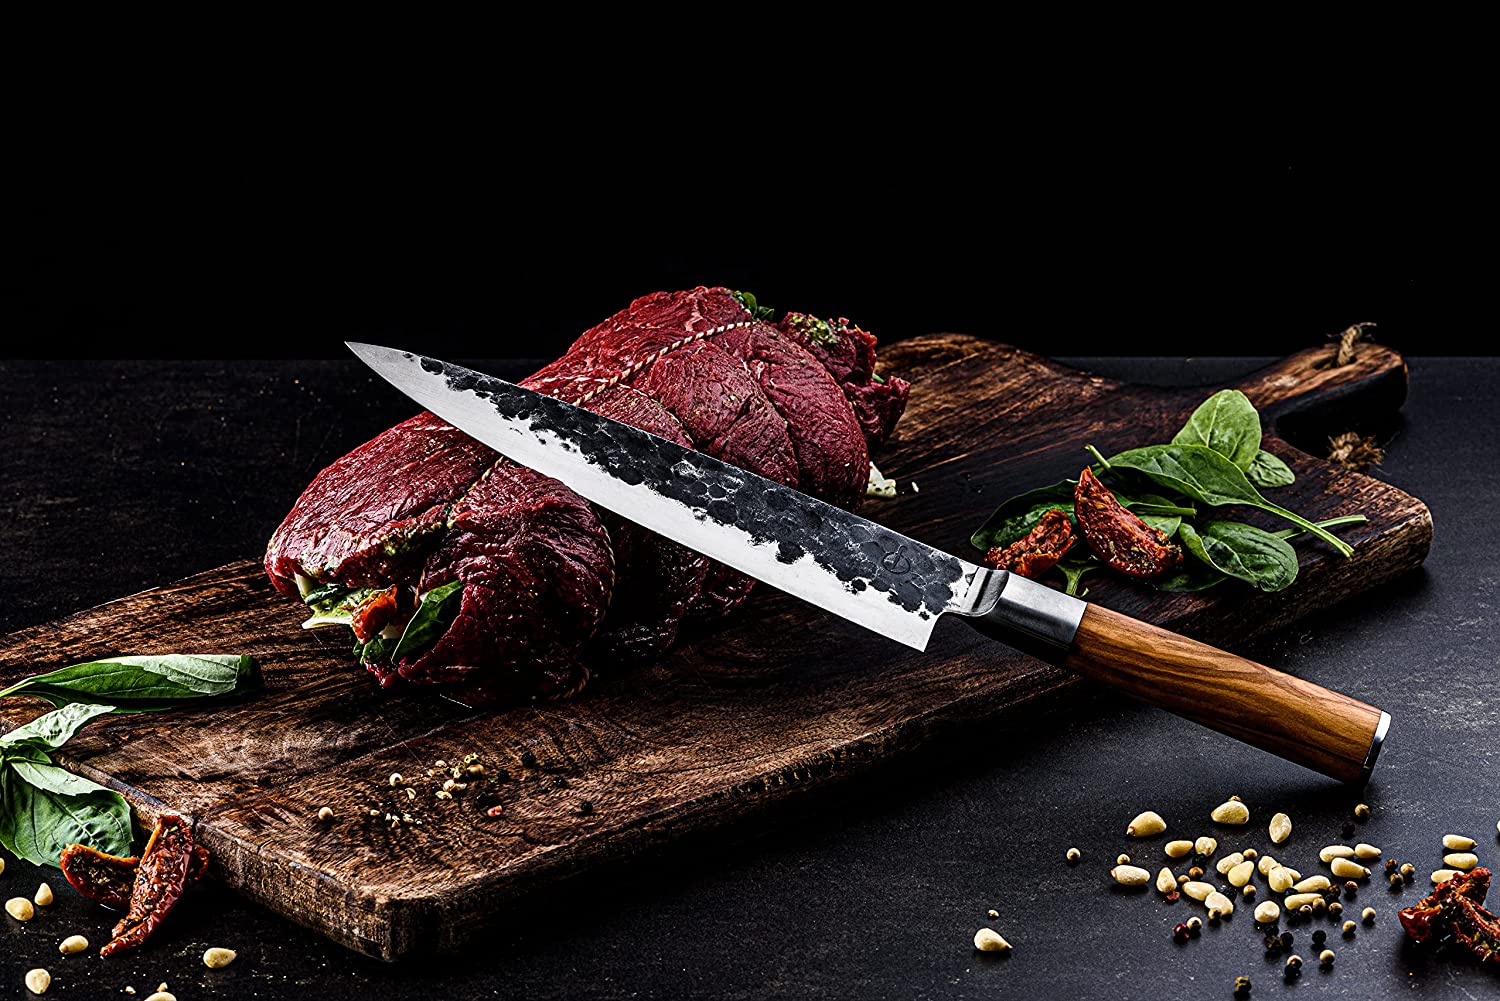 https://www.woklove.com/wp-content/uploads/2022/06/Forged-Olive-Chefs-knife-cutting.jpg